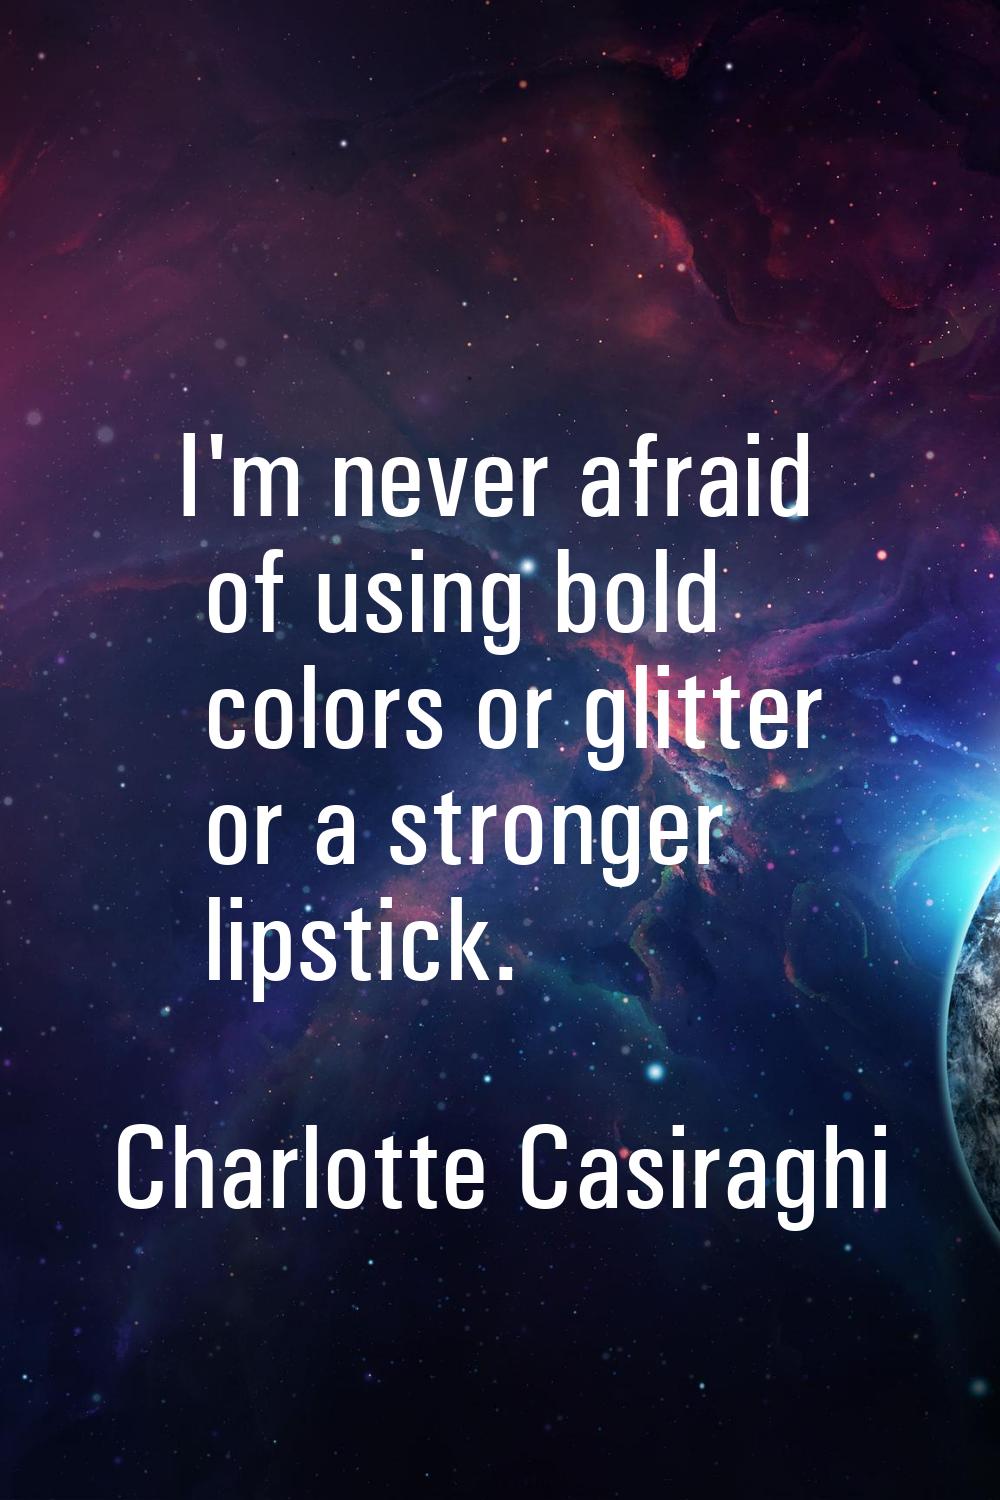 I'm never afraid of using bold colors or glitter or a stronger lipstick.